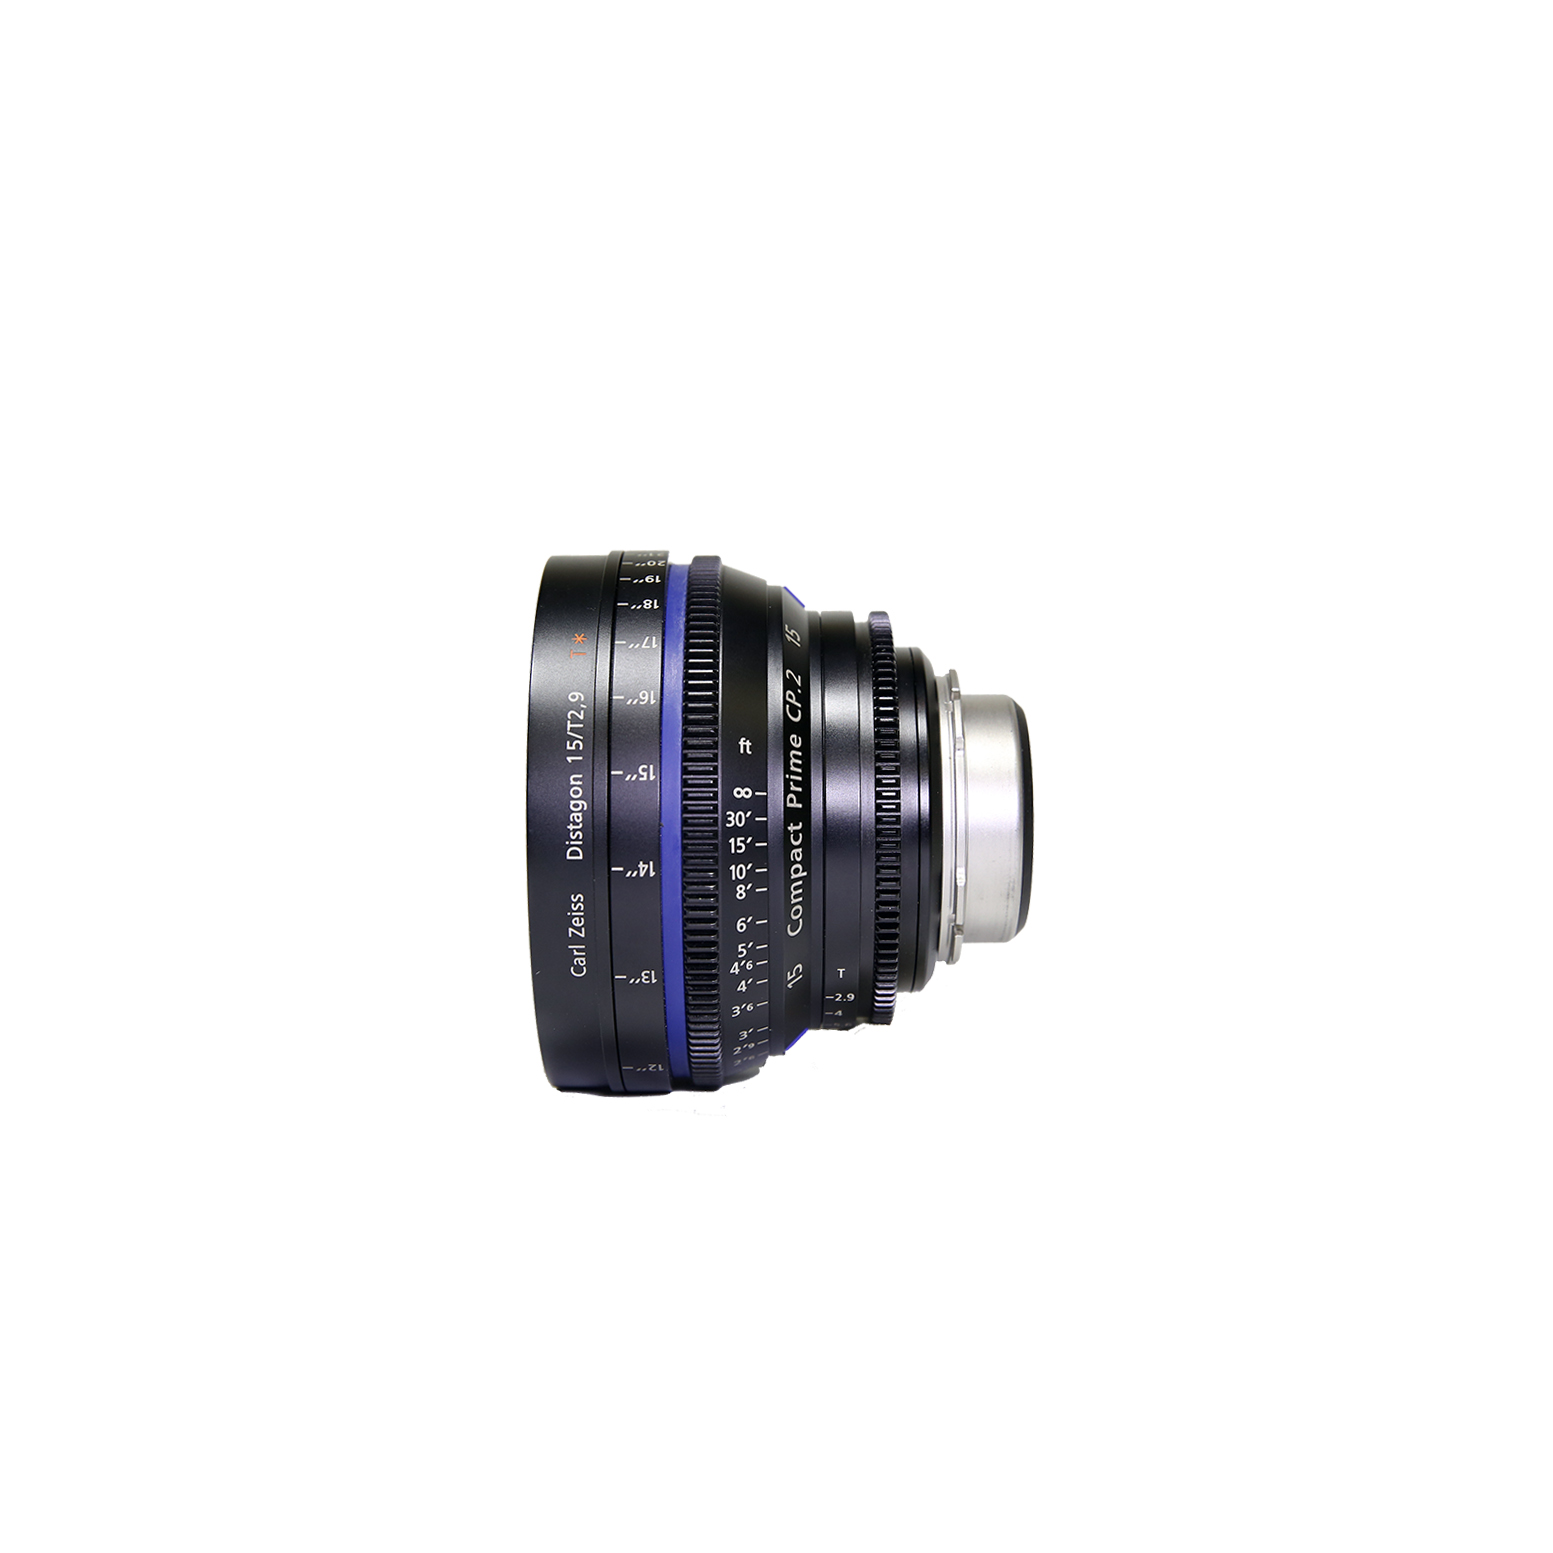 Zeiss Compact Prime CP.2 15mm f/2.9 T(Metric) Lens with MFT(Micro Four  Thirds) Mount